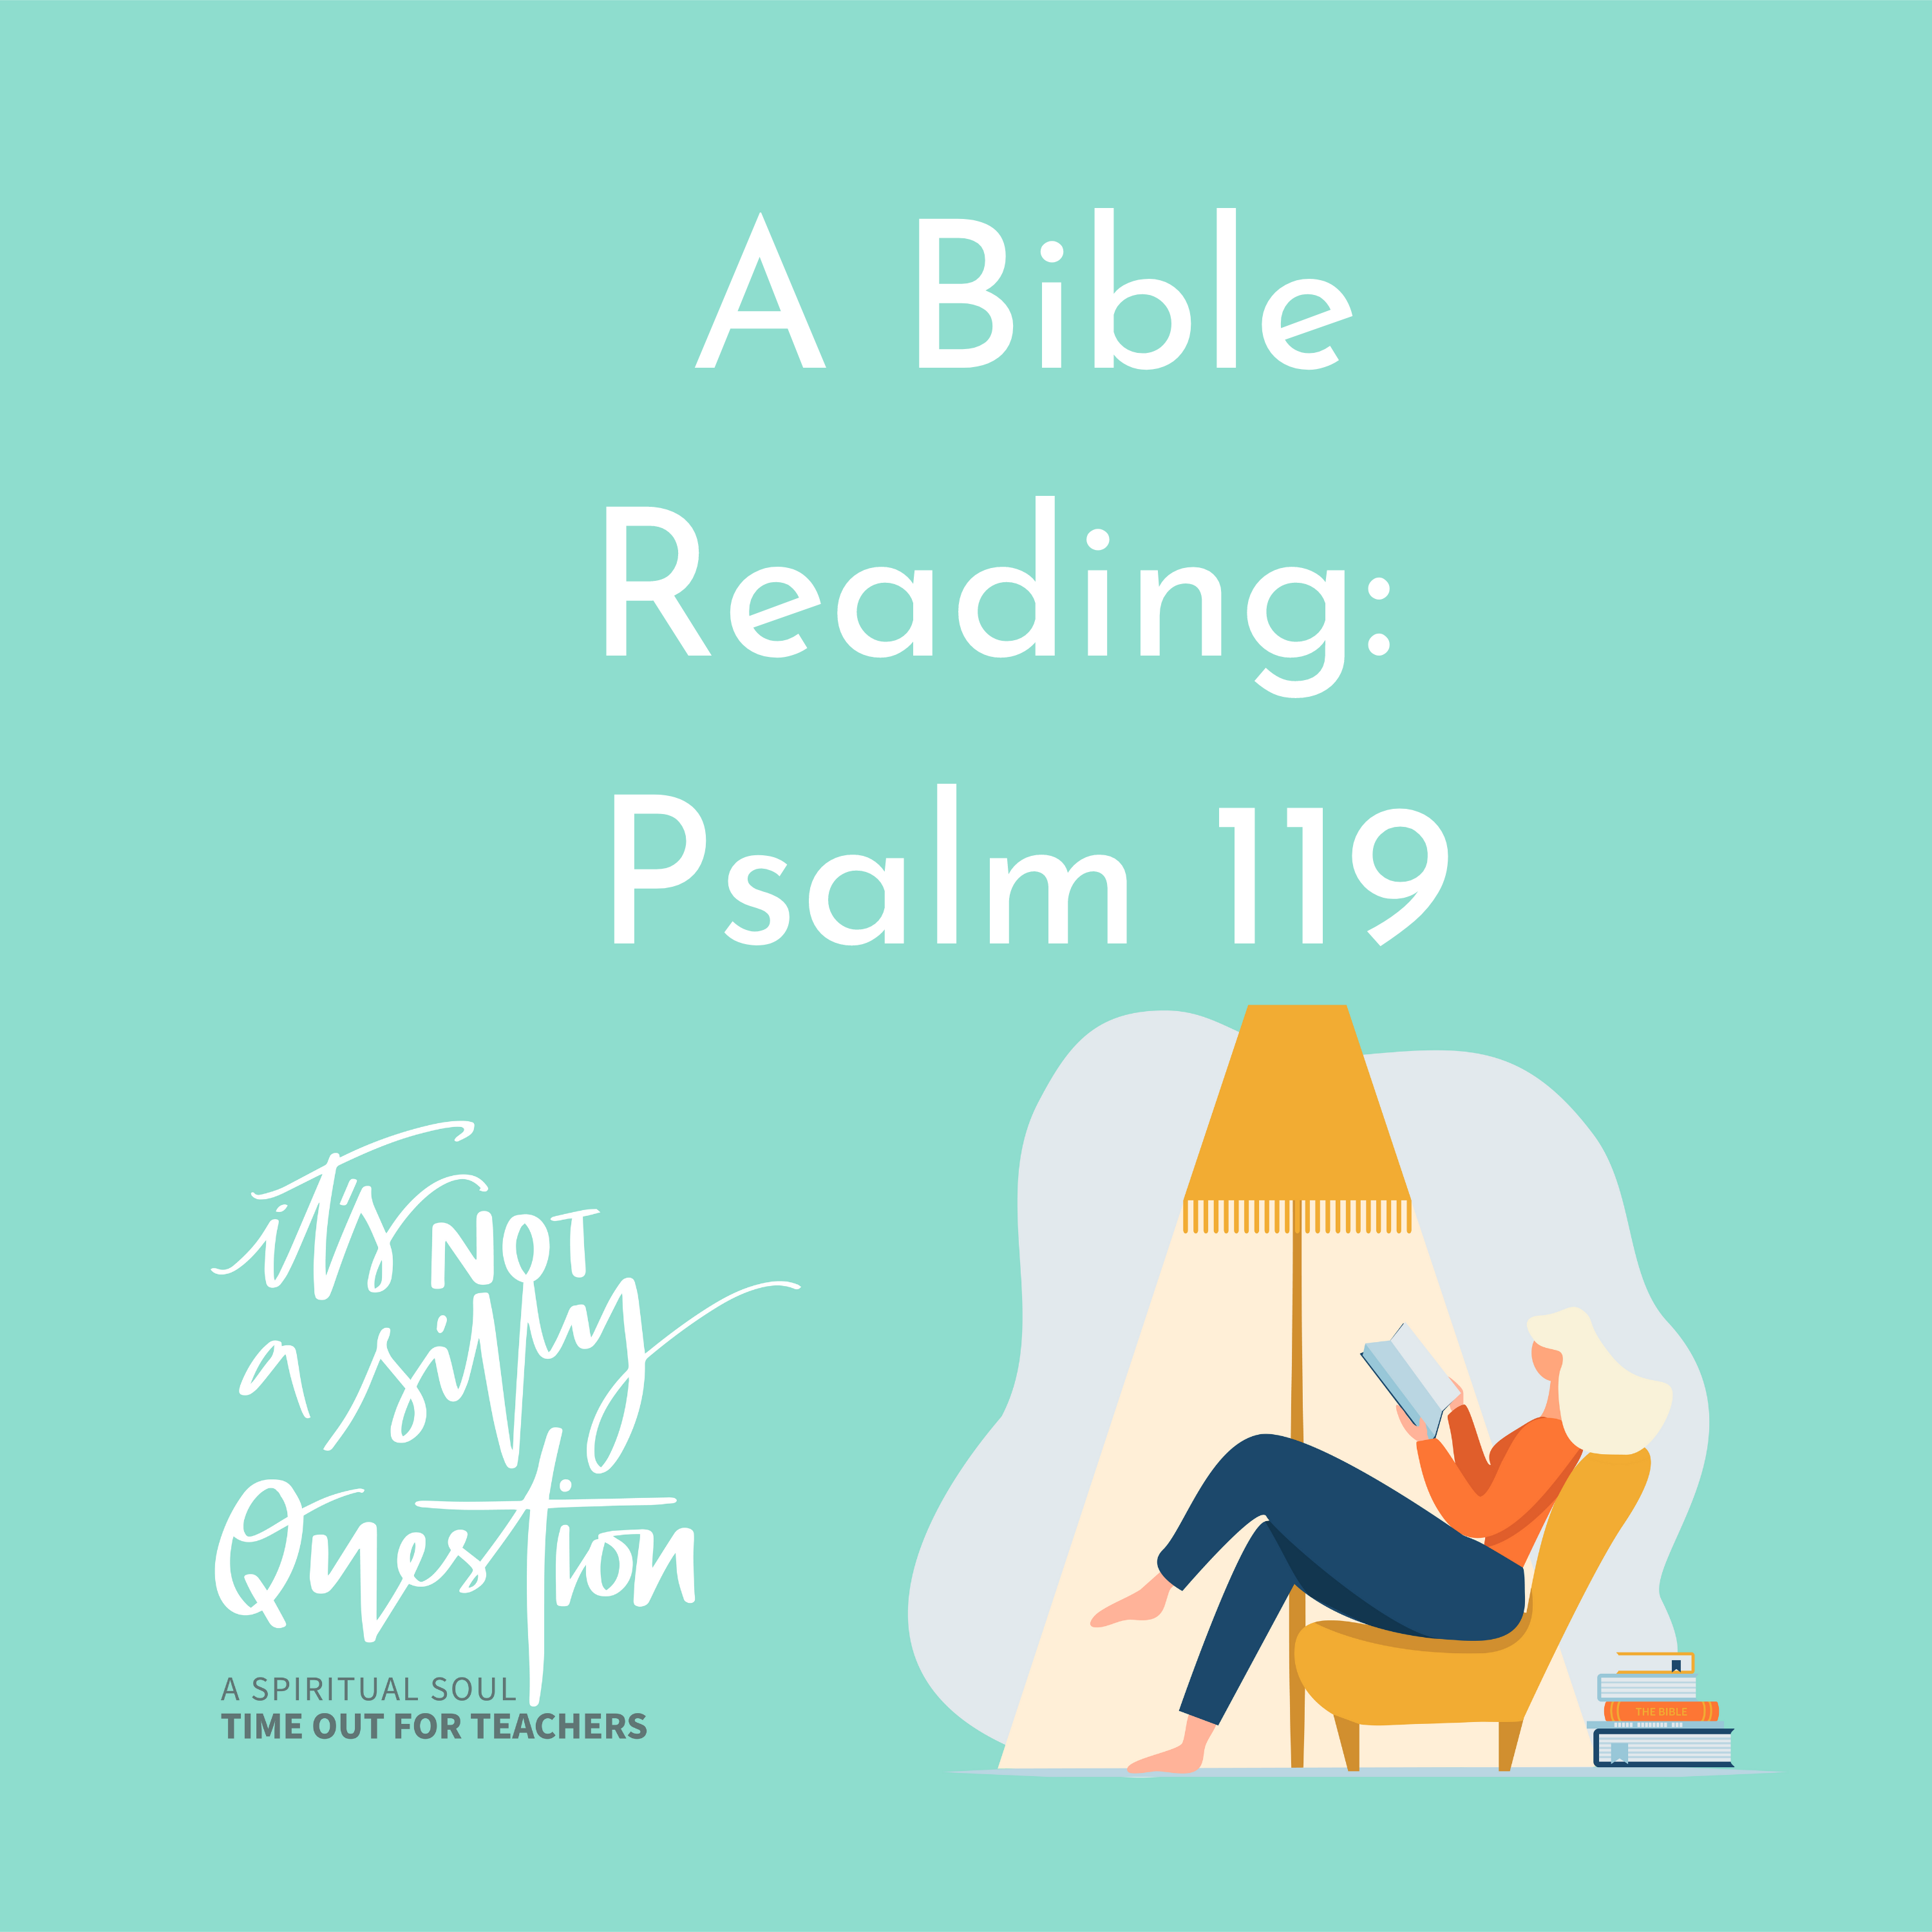 A Bible Reading: Psalm 119